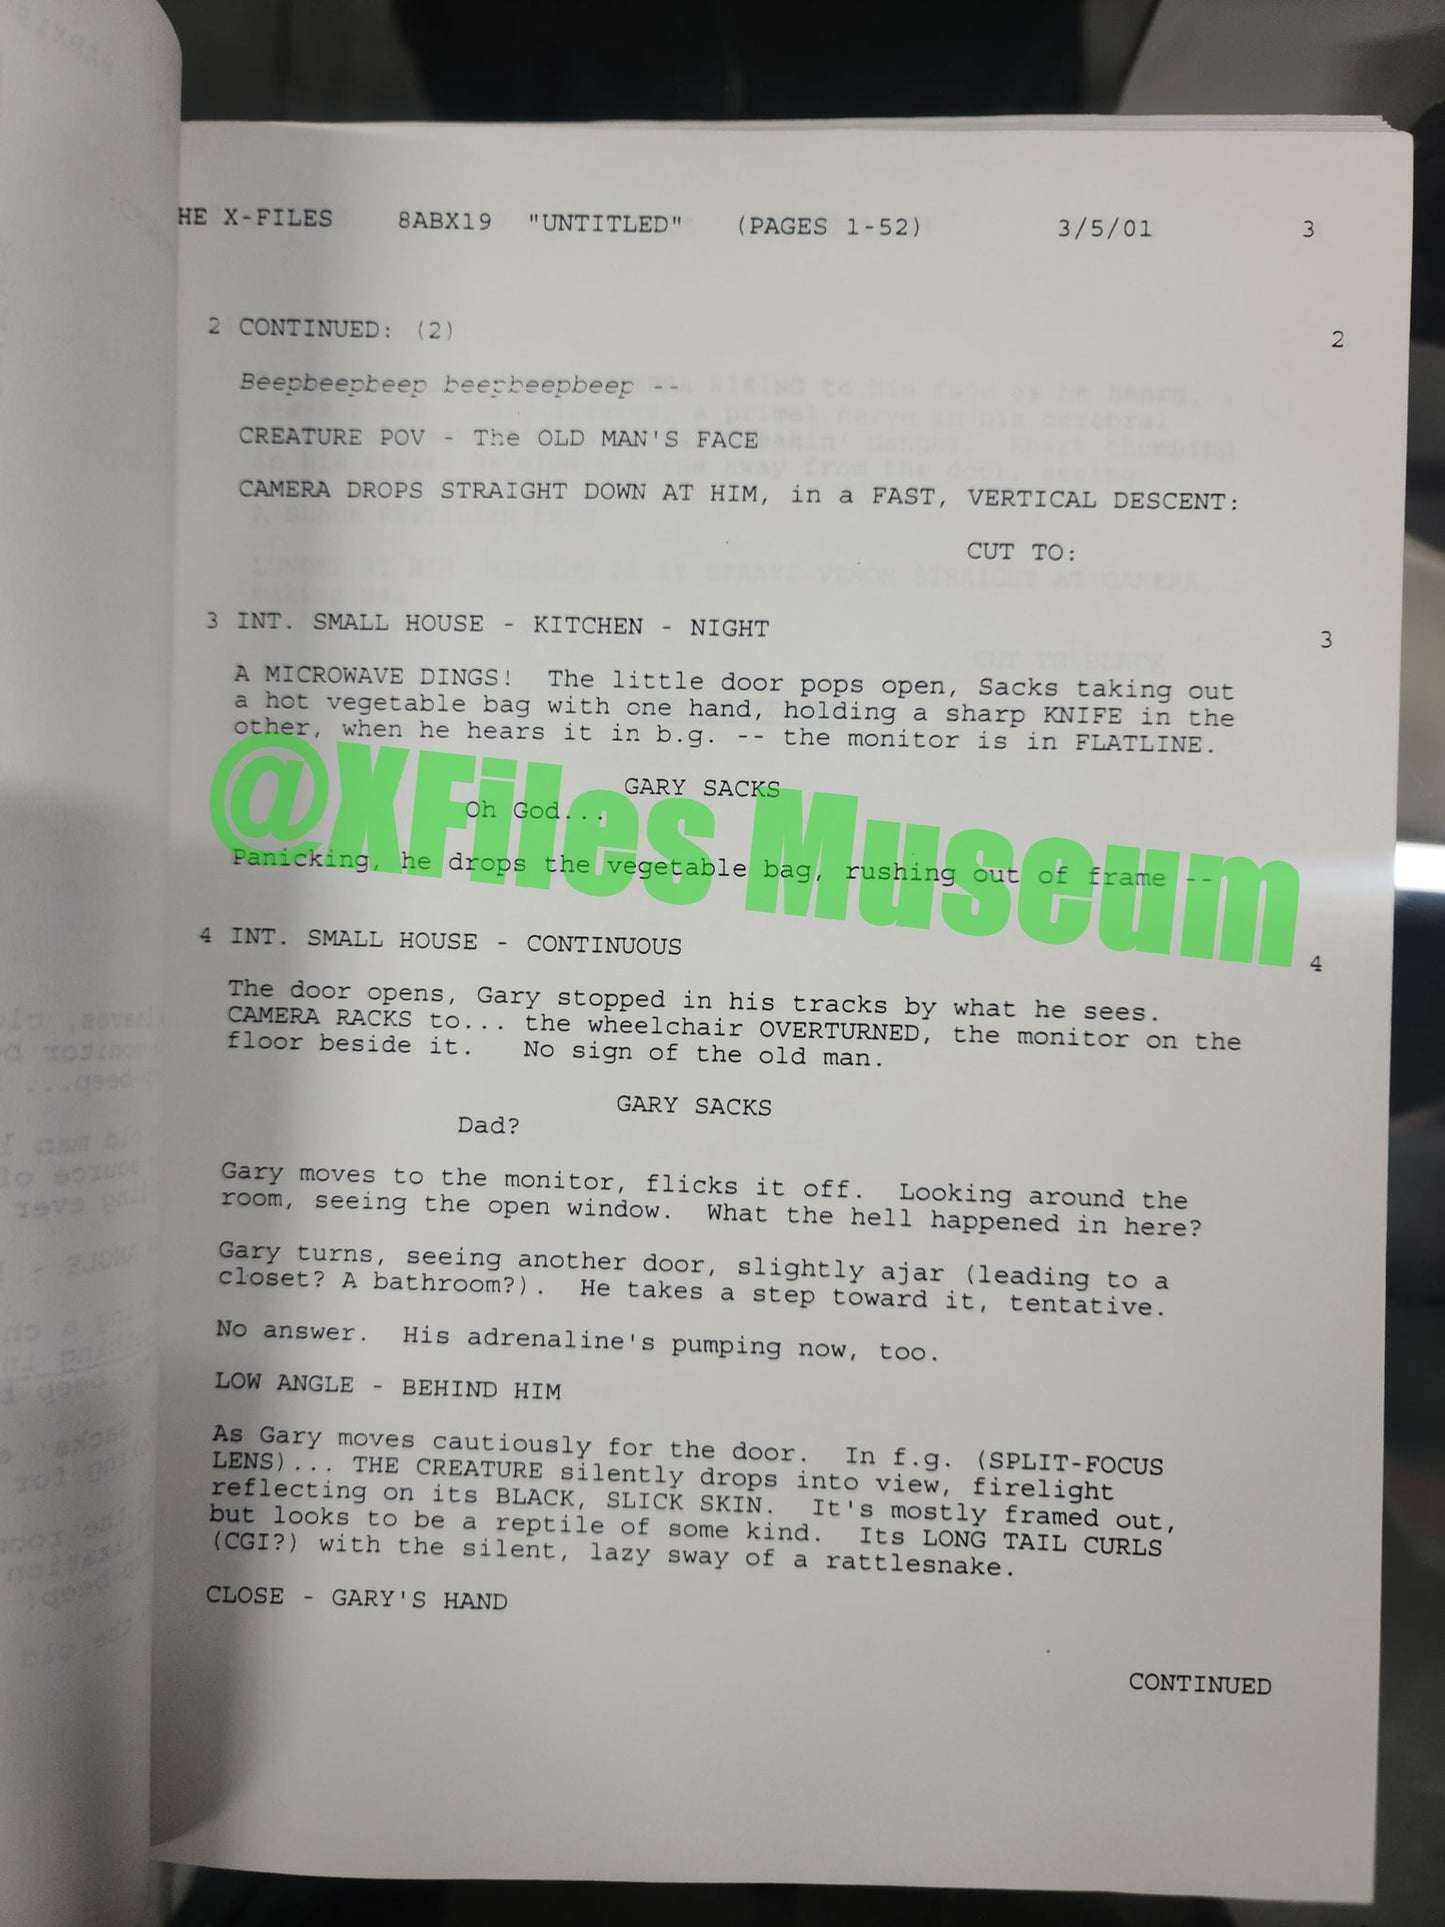 X Files Script -Episode "ALONE" - Not Production Used